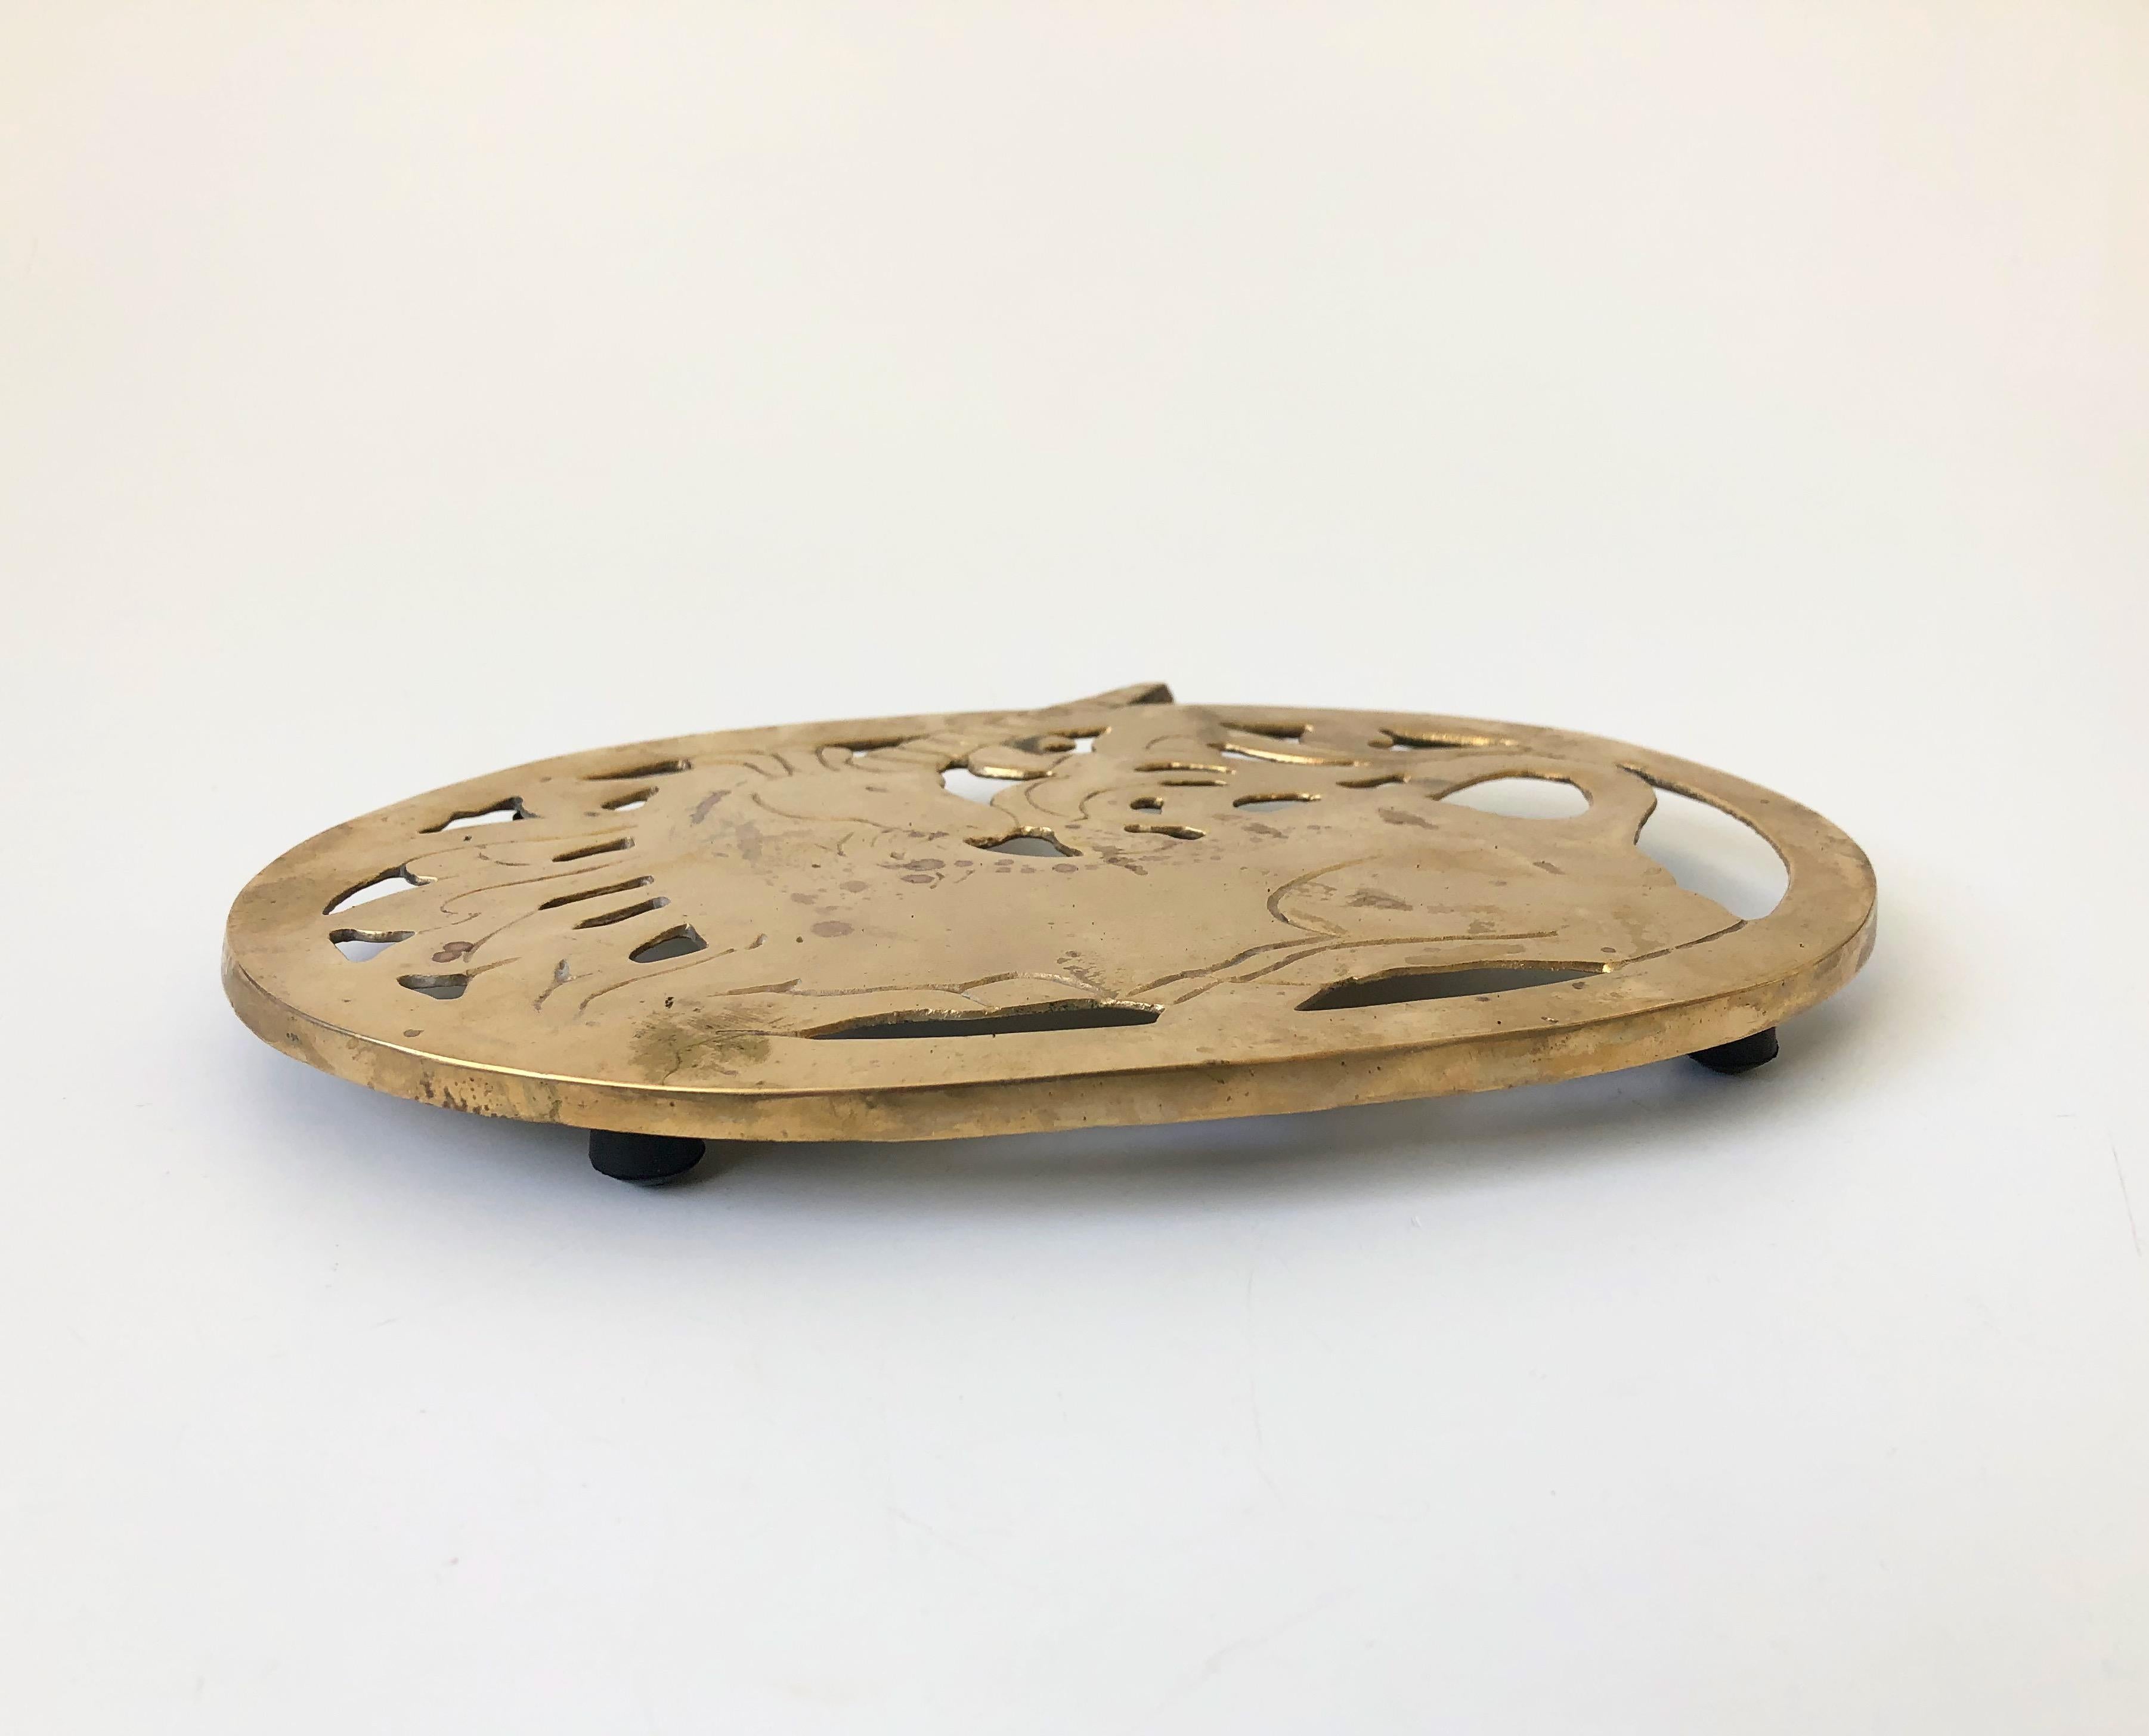 A beautiful oval brass trivet with the design of a unicorn. Perfect for keeping hot plates off of surfaces. Made in Taiwan by Knobler.
 